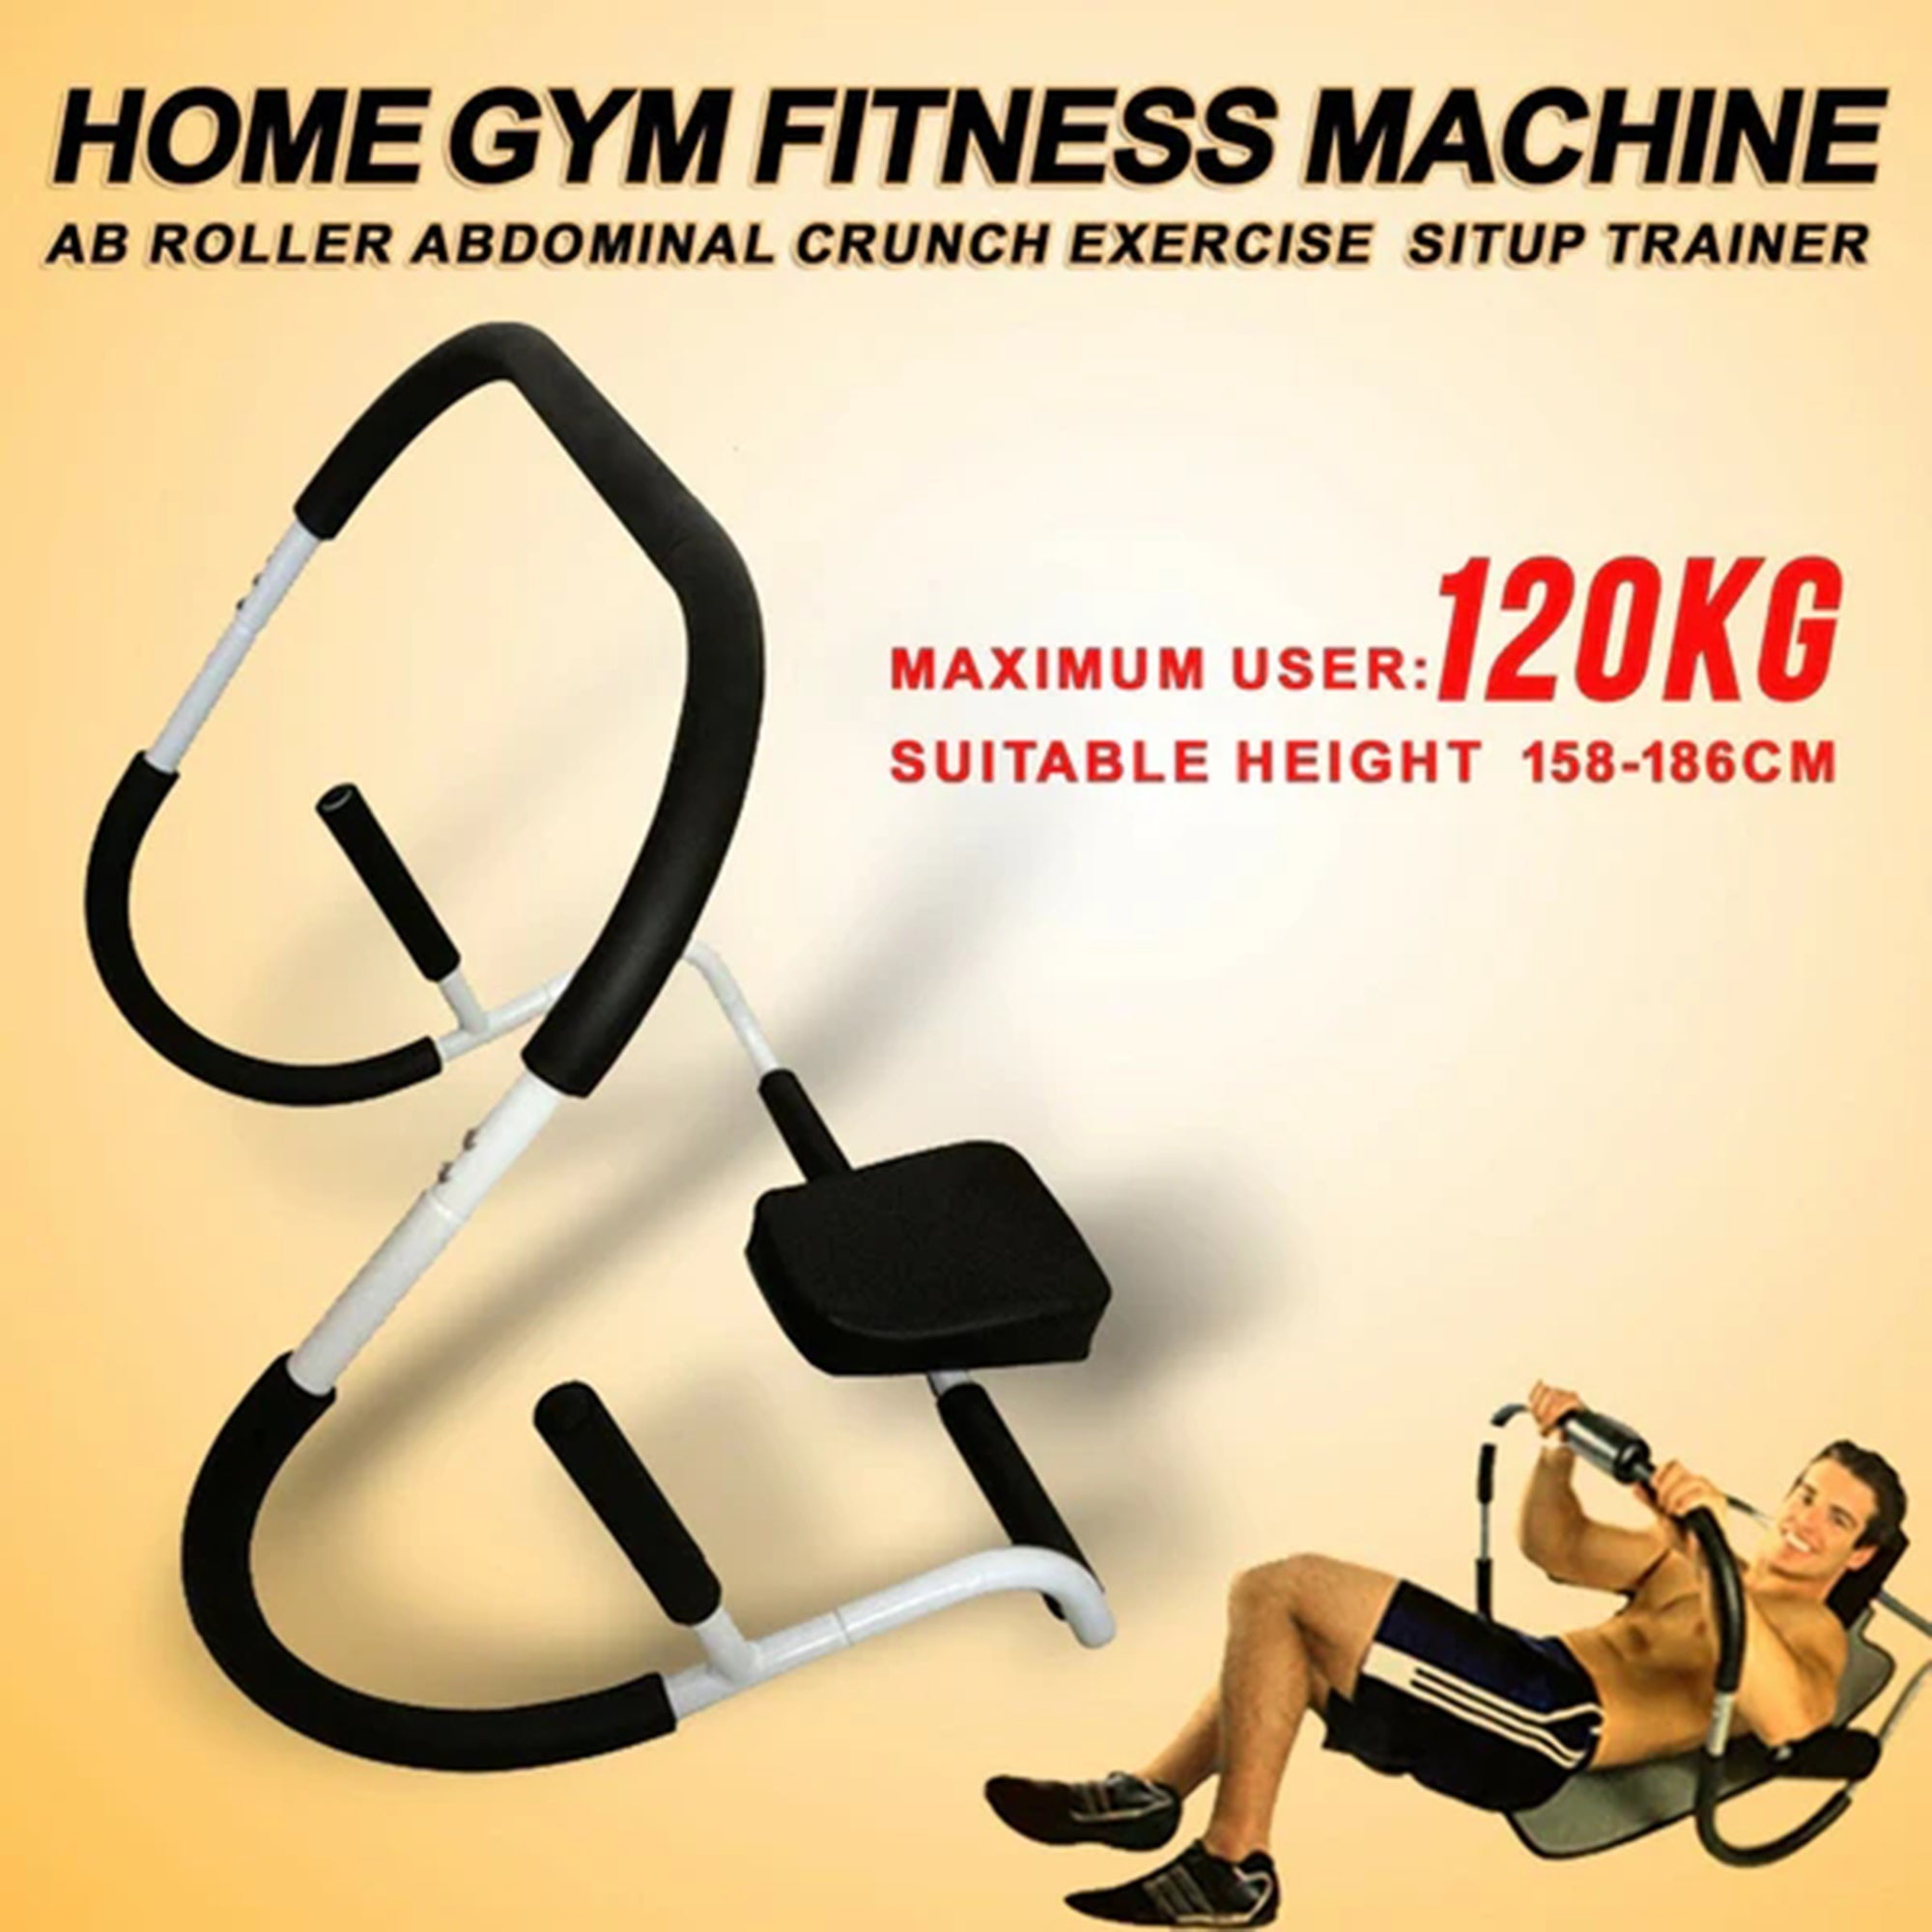 Home Gym Fitness Ab Roller Abdominal Crunch Exercise Machine Situp Trainer Buy Ab Machines